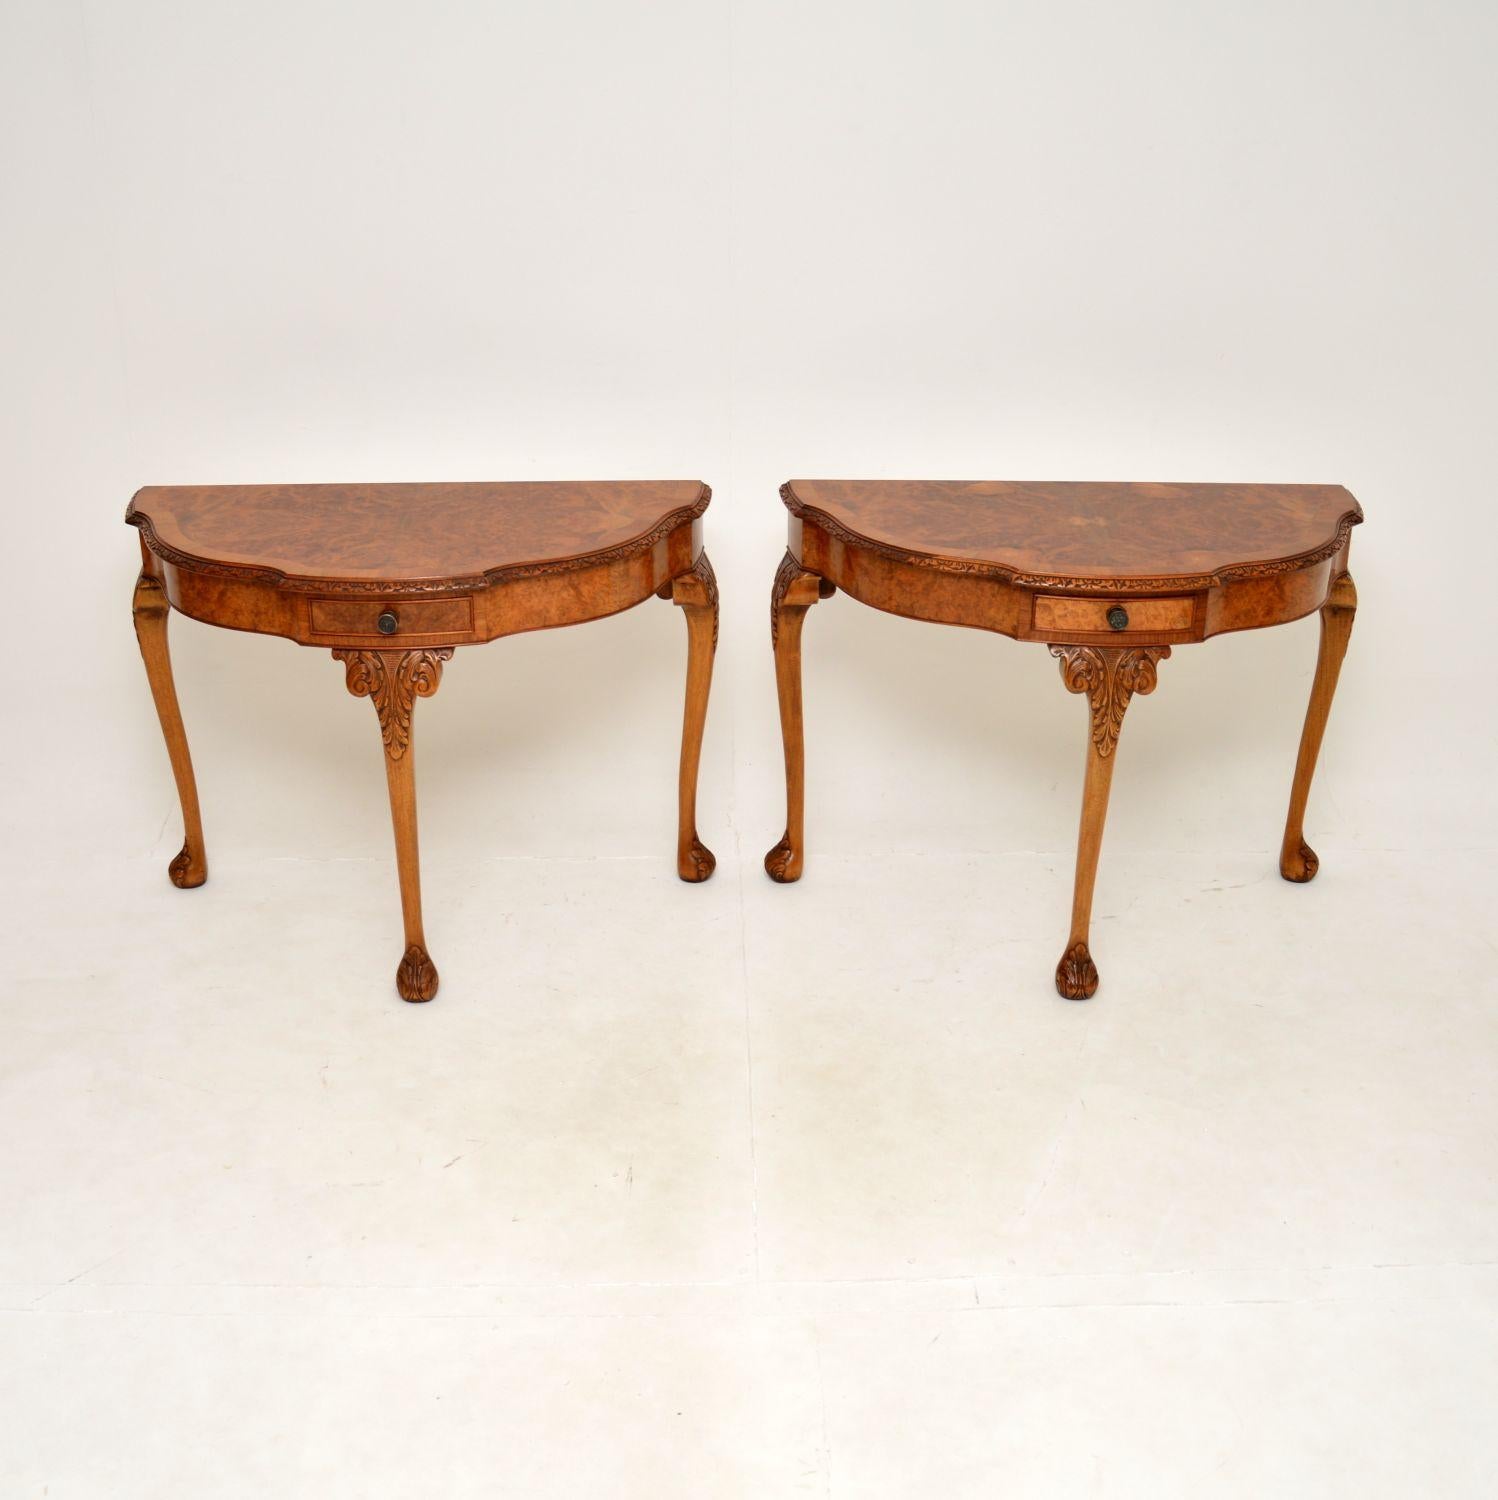 A beautiful and extremely well made pair of antique Queen Anne style burr walnut console tables. They were made in England, they date from around the 1930’s & it’s very rare to find a pair of these.

The quality is outstanding, they have gorgeous